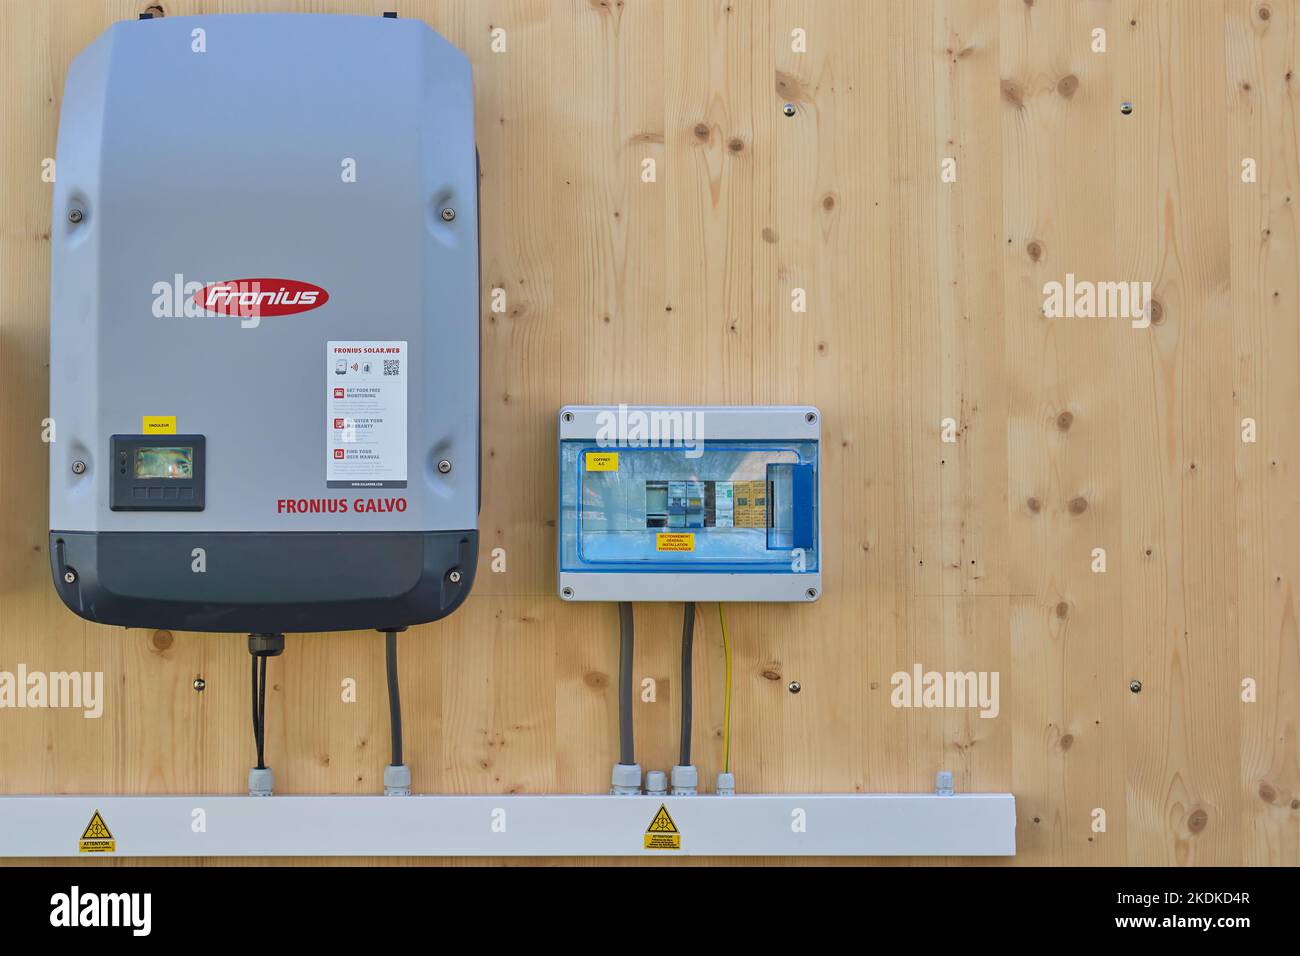 Almere, The Netherlands - April 21, 2022: Wooden wall with new solar panel inverter and battery charger system in Almere, The Netherlands Stock Photo